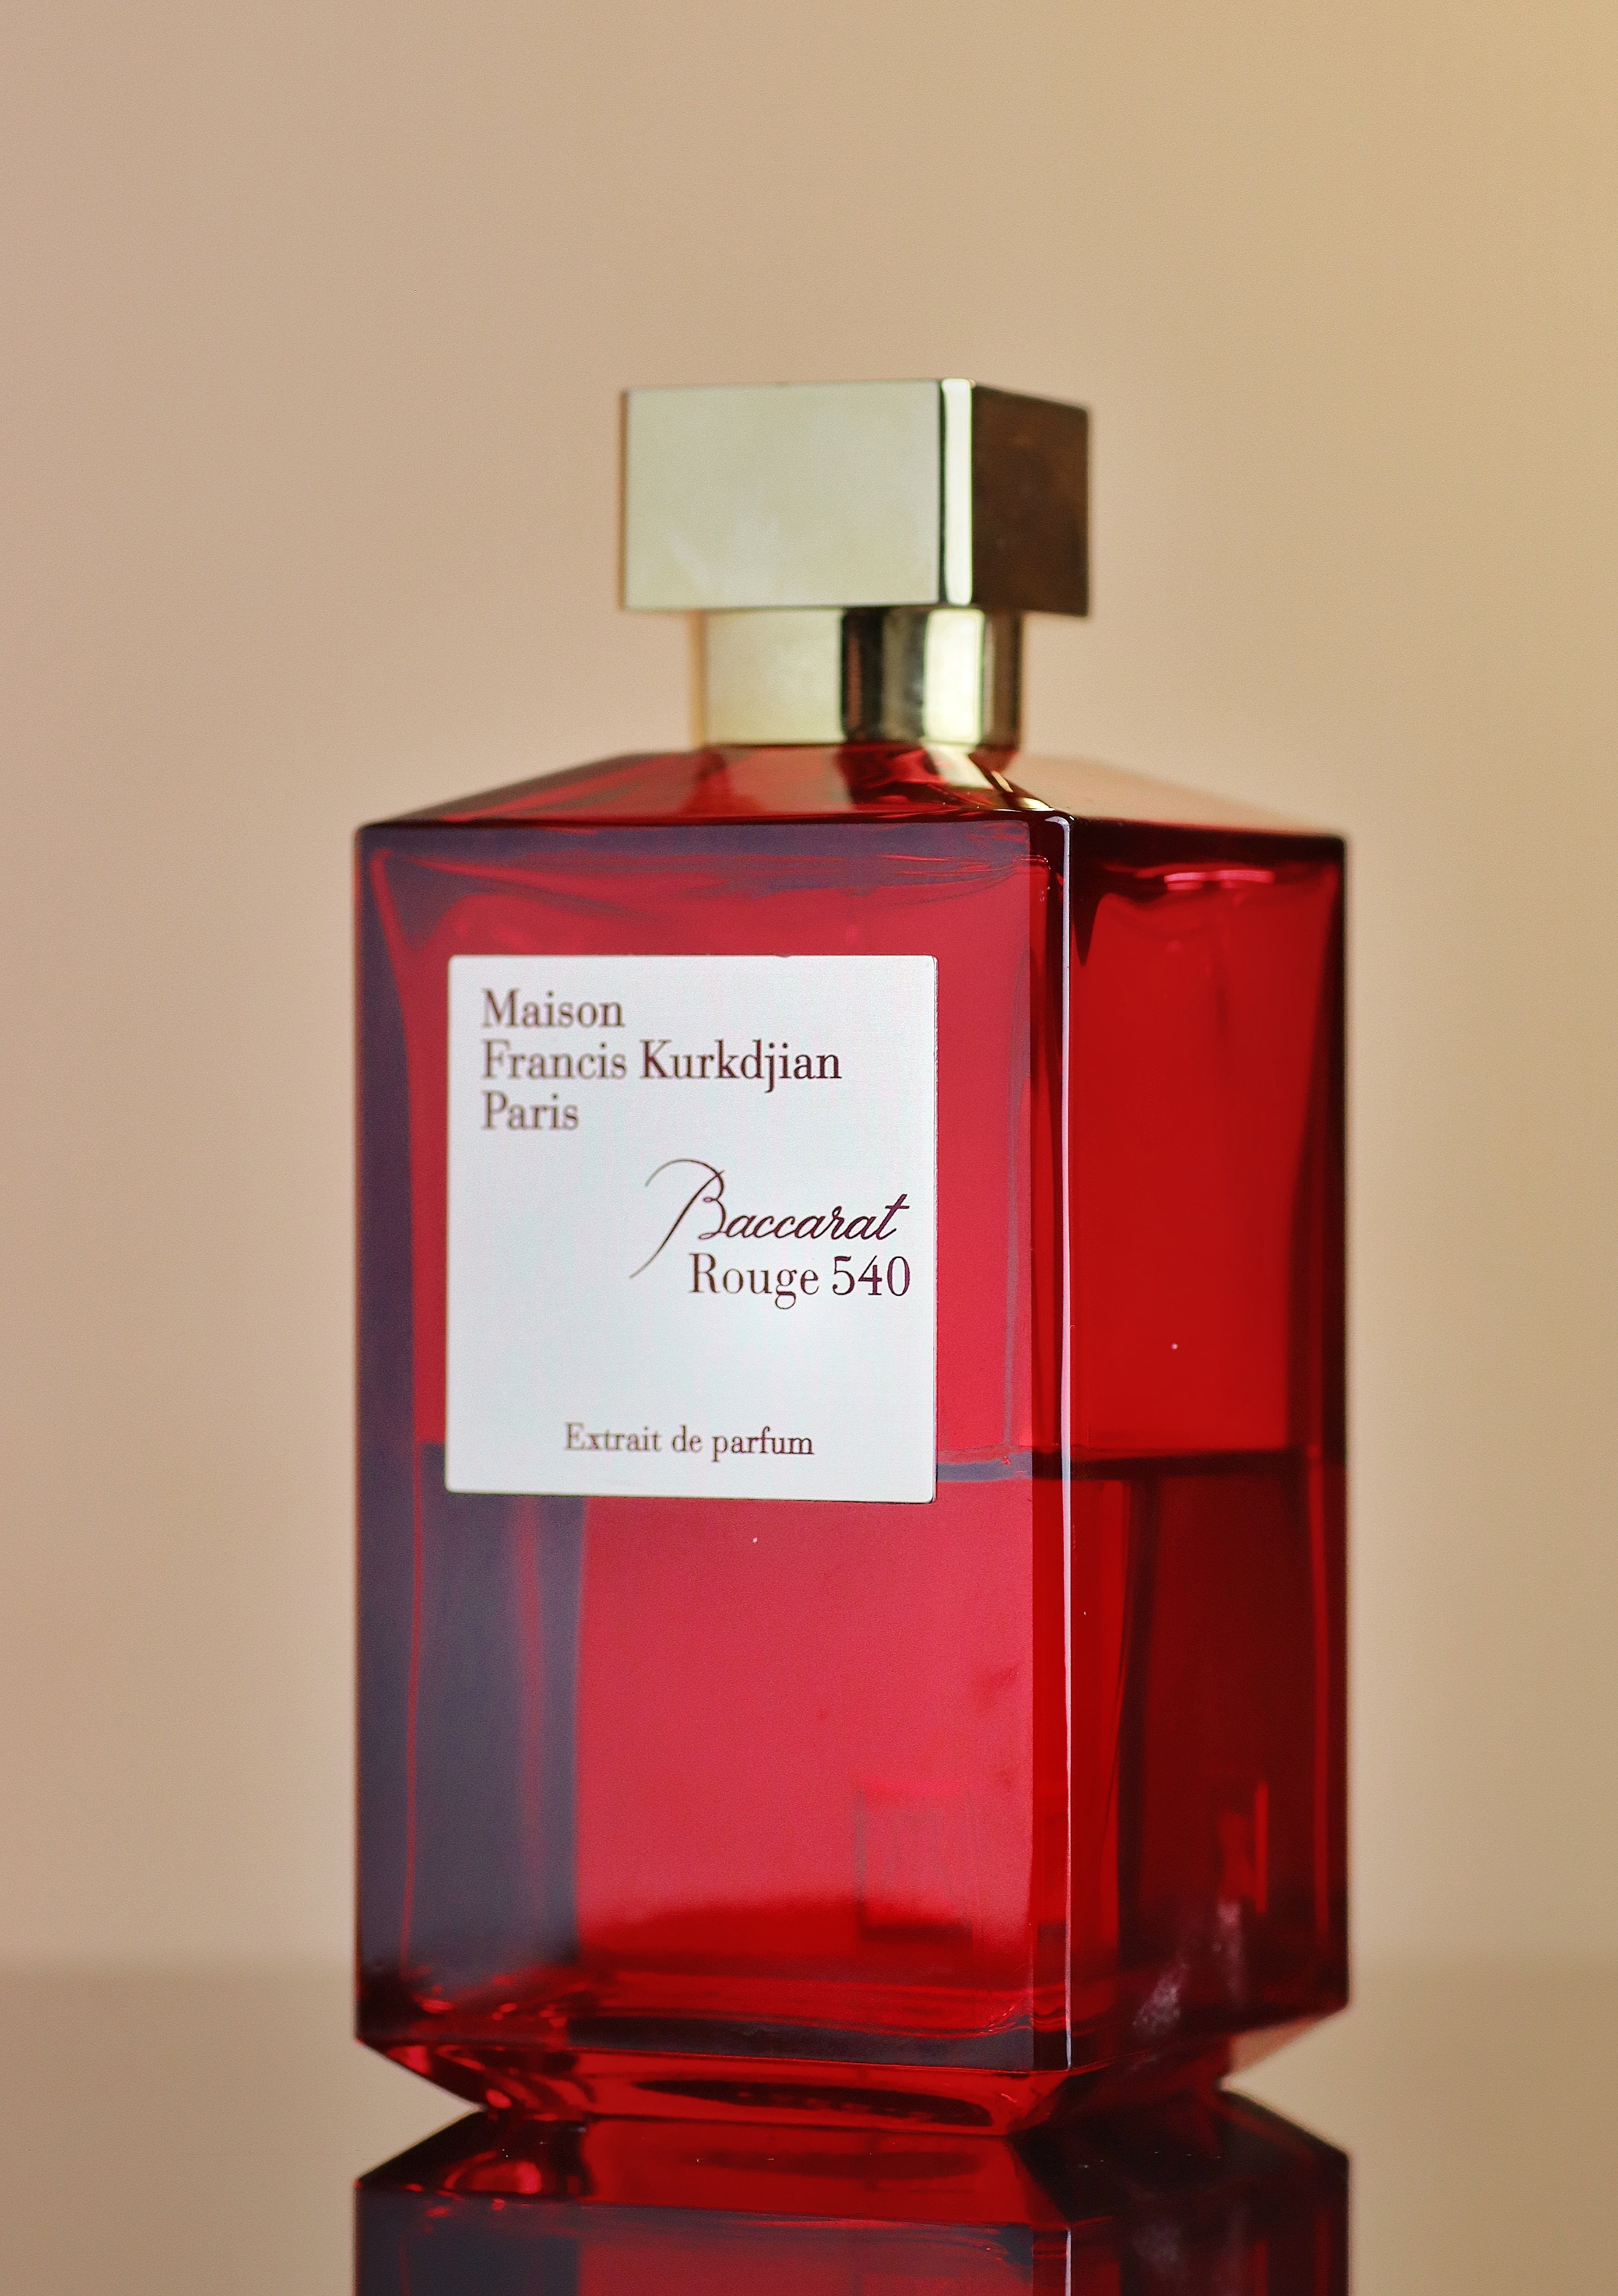 Unisex Perfume Samples  Fragrance Samples - Visionary Fragrances – Tagged Louis  Vuitton